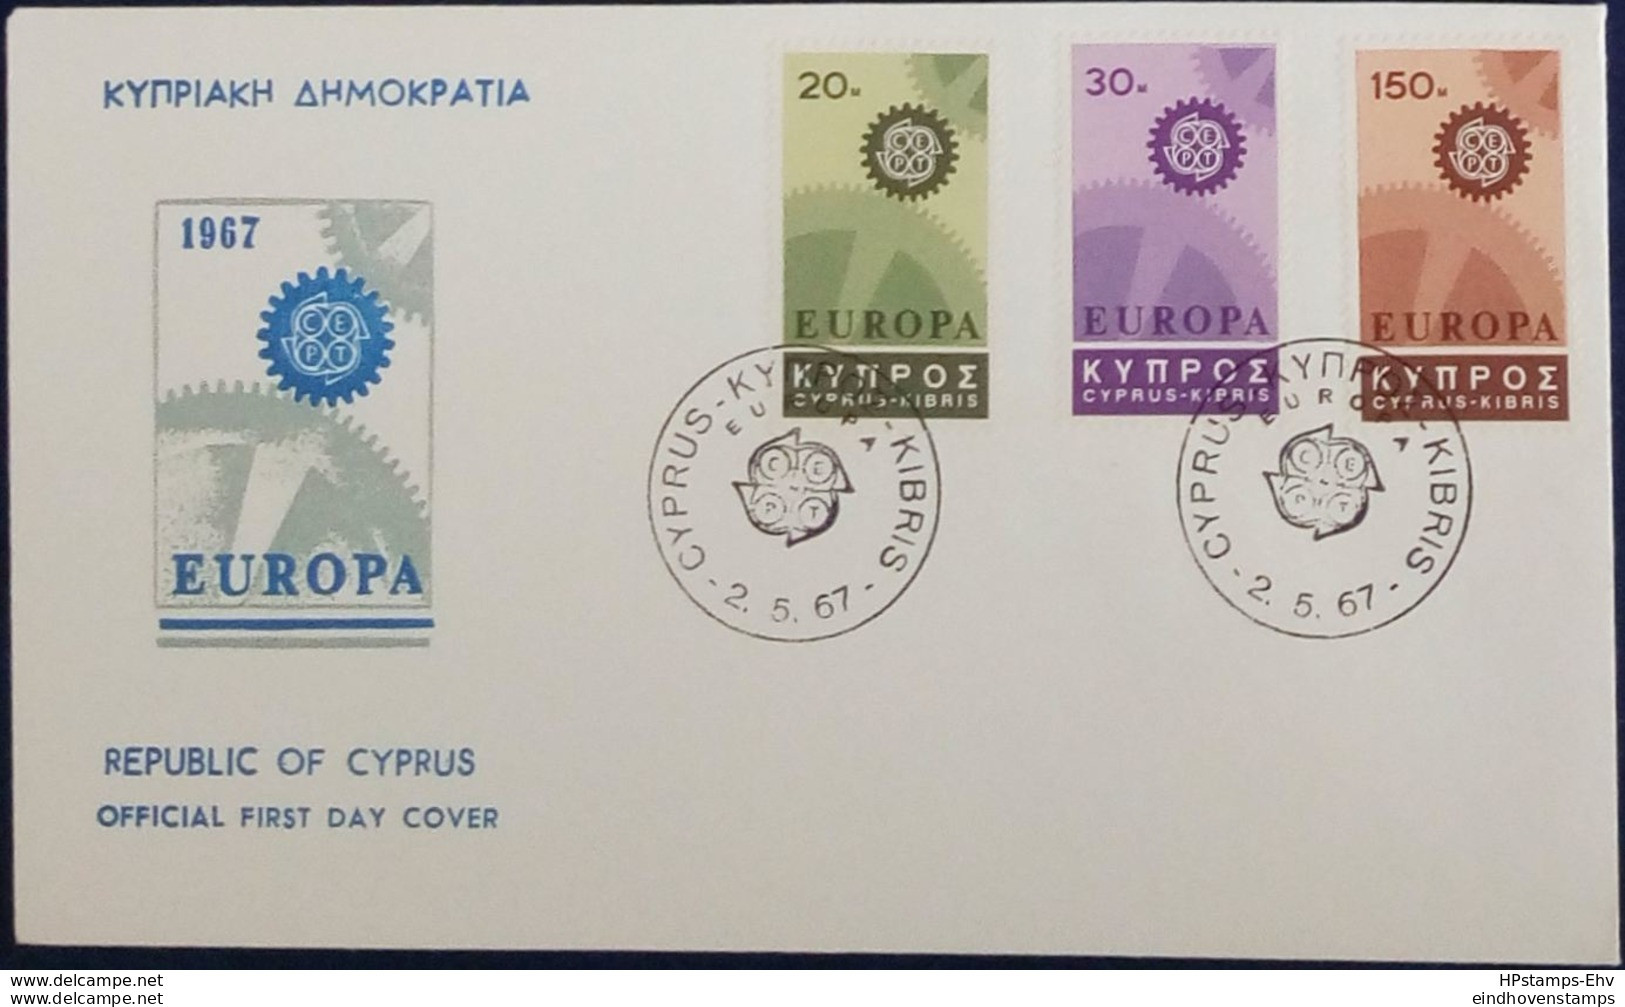 Cyprus 1967 Cept Issue FDC 2002.2638 - 1967